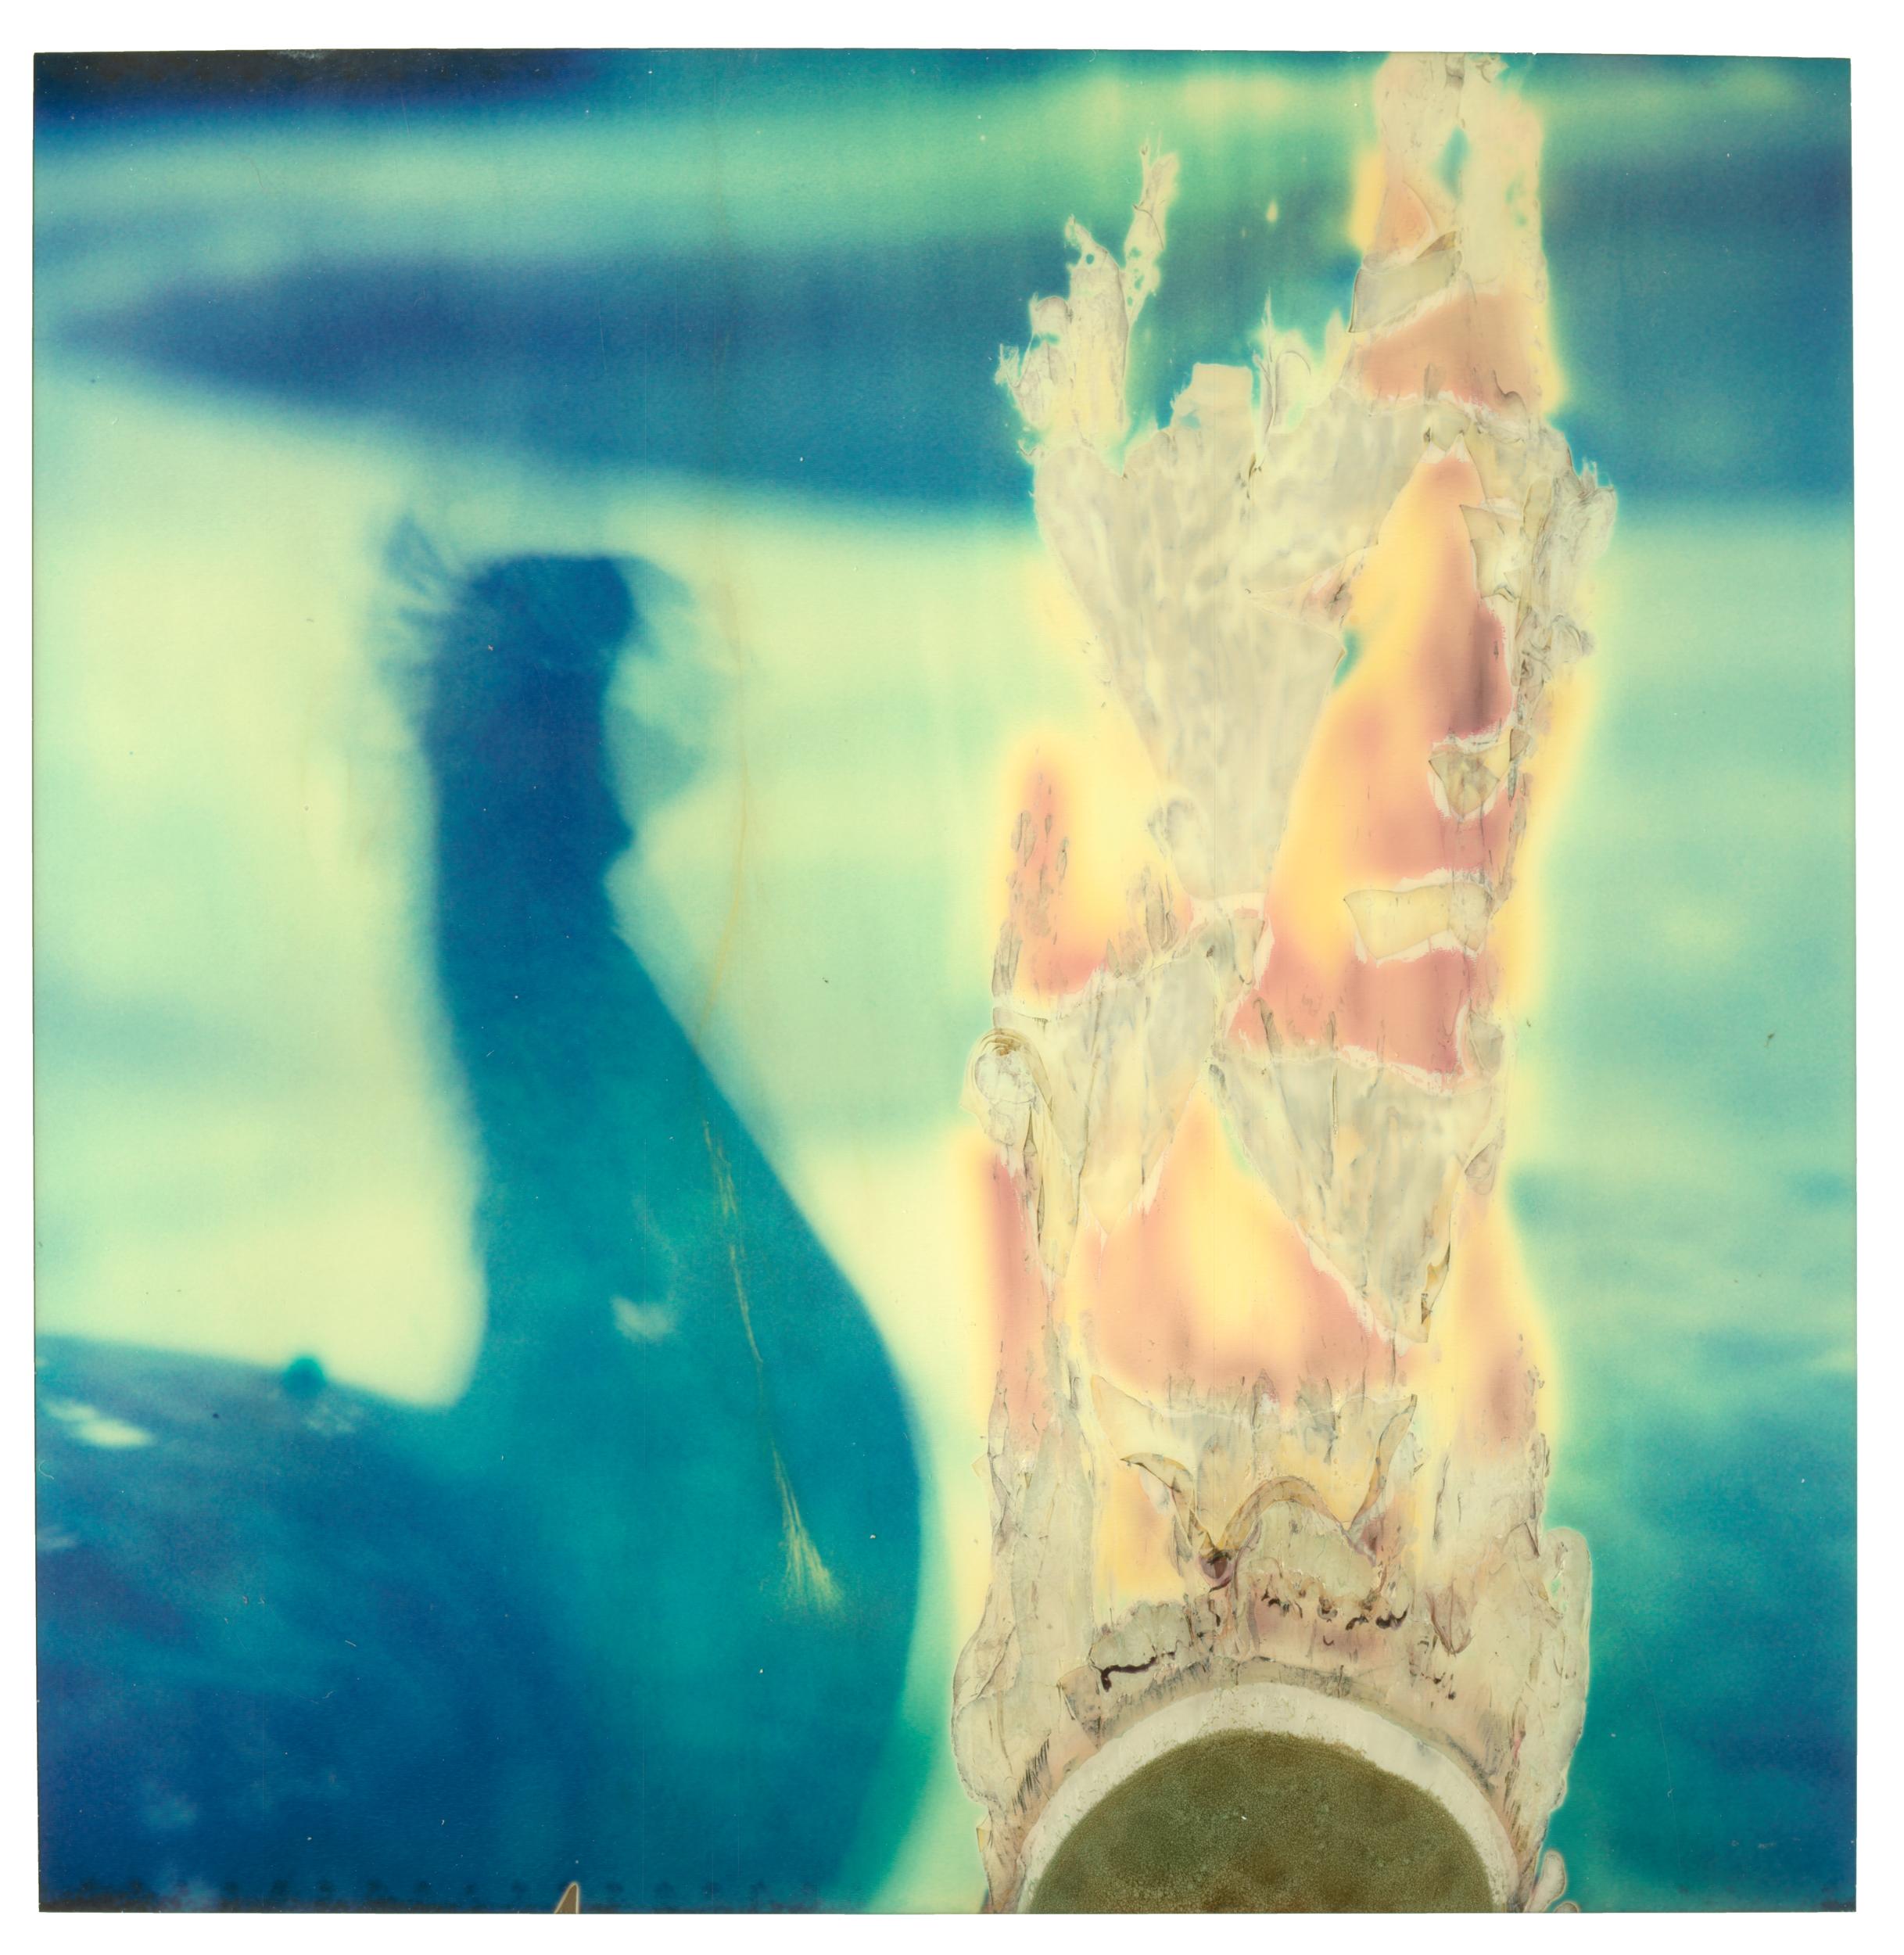 The Peacock's Flame (Stay) - Polaroid, 21st Century